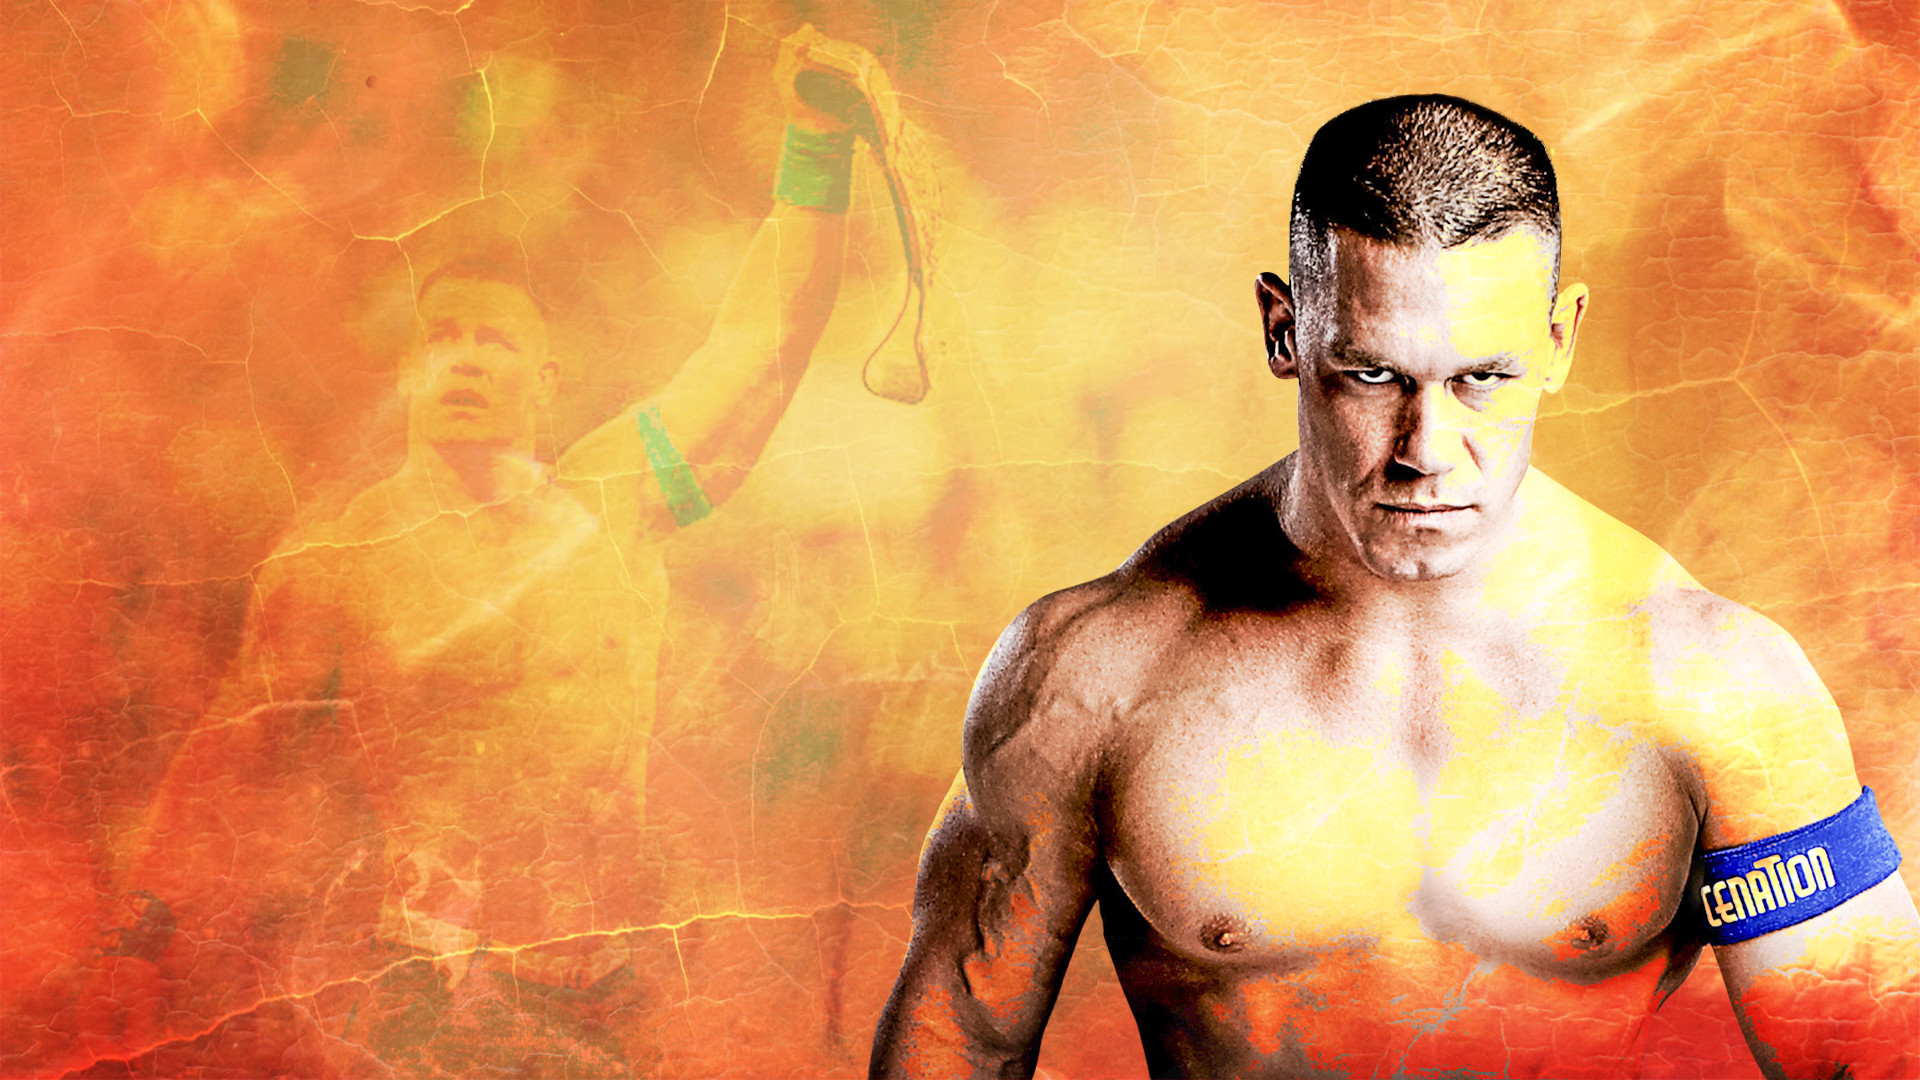 1920x1080 For Roman Reigns wallpapers click here. John Cena ...